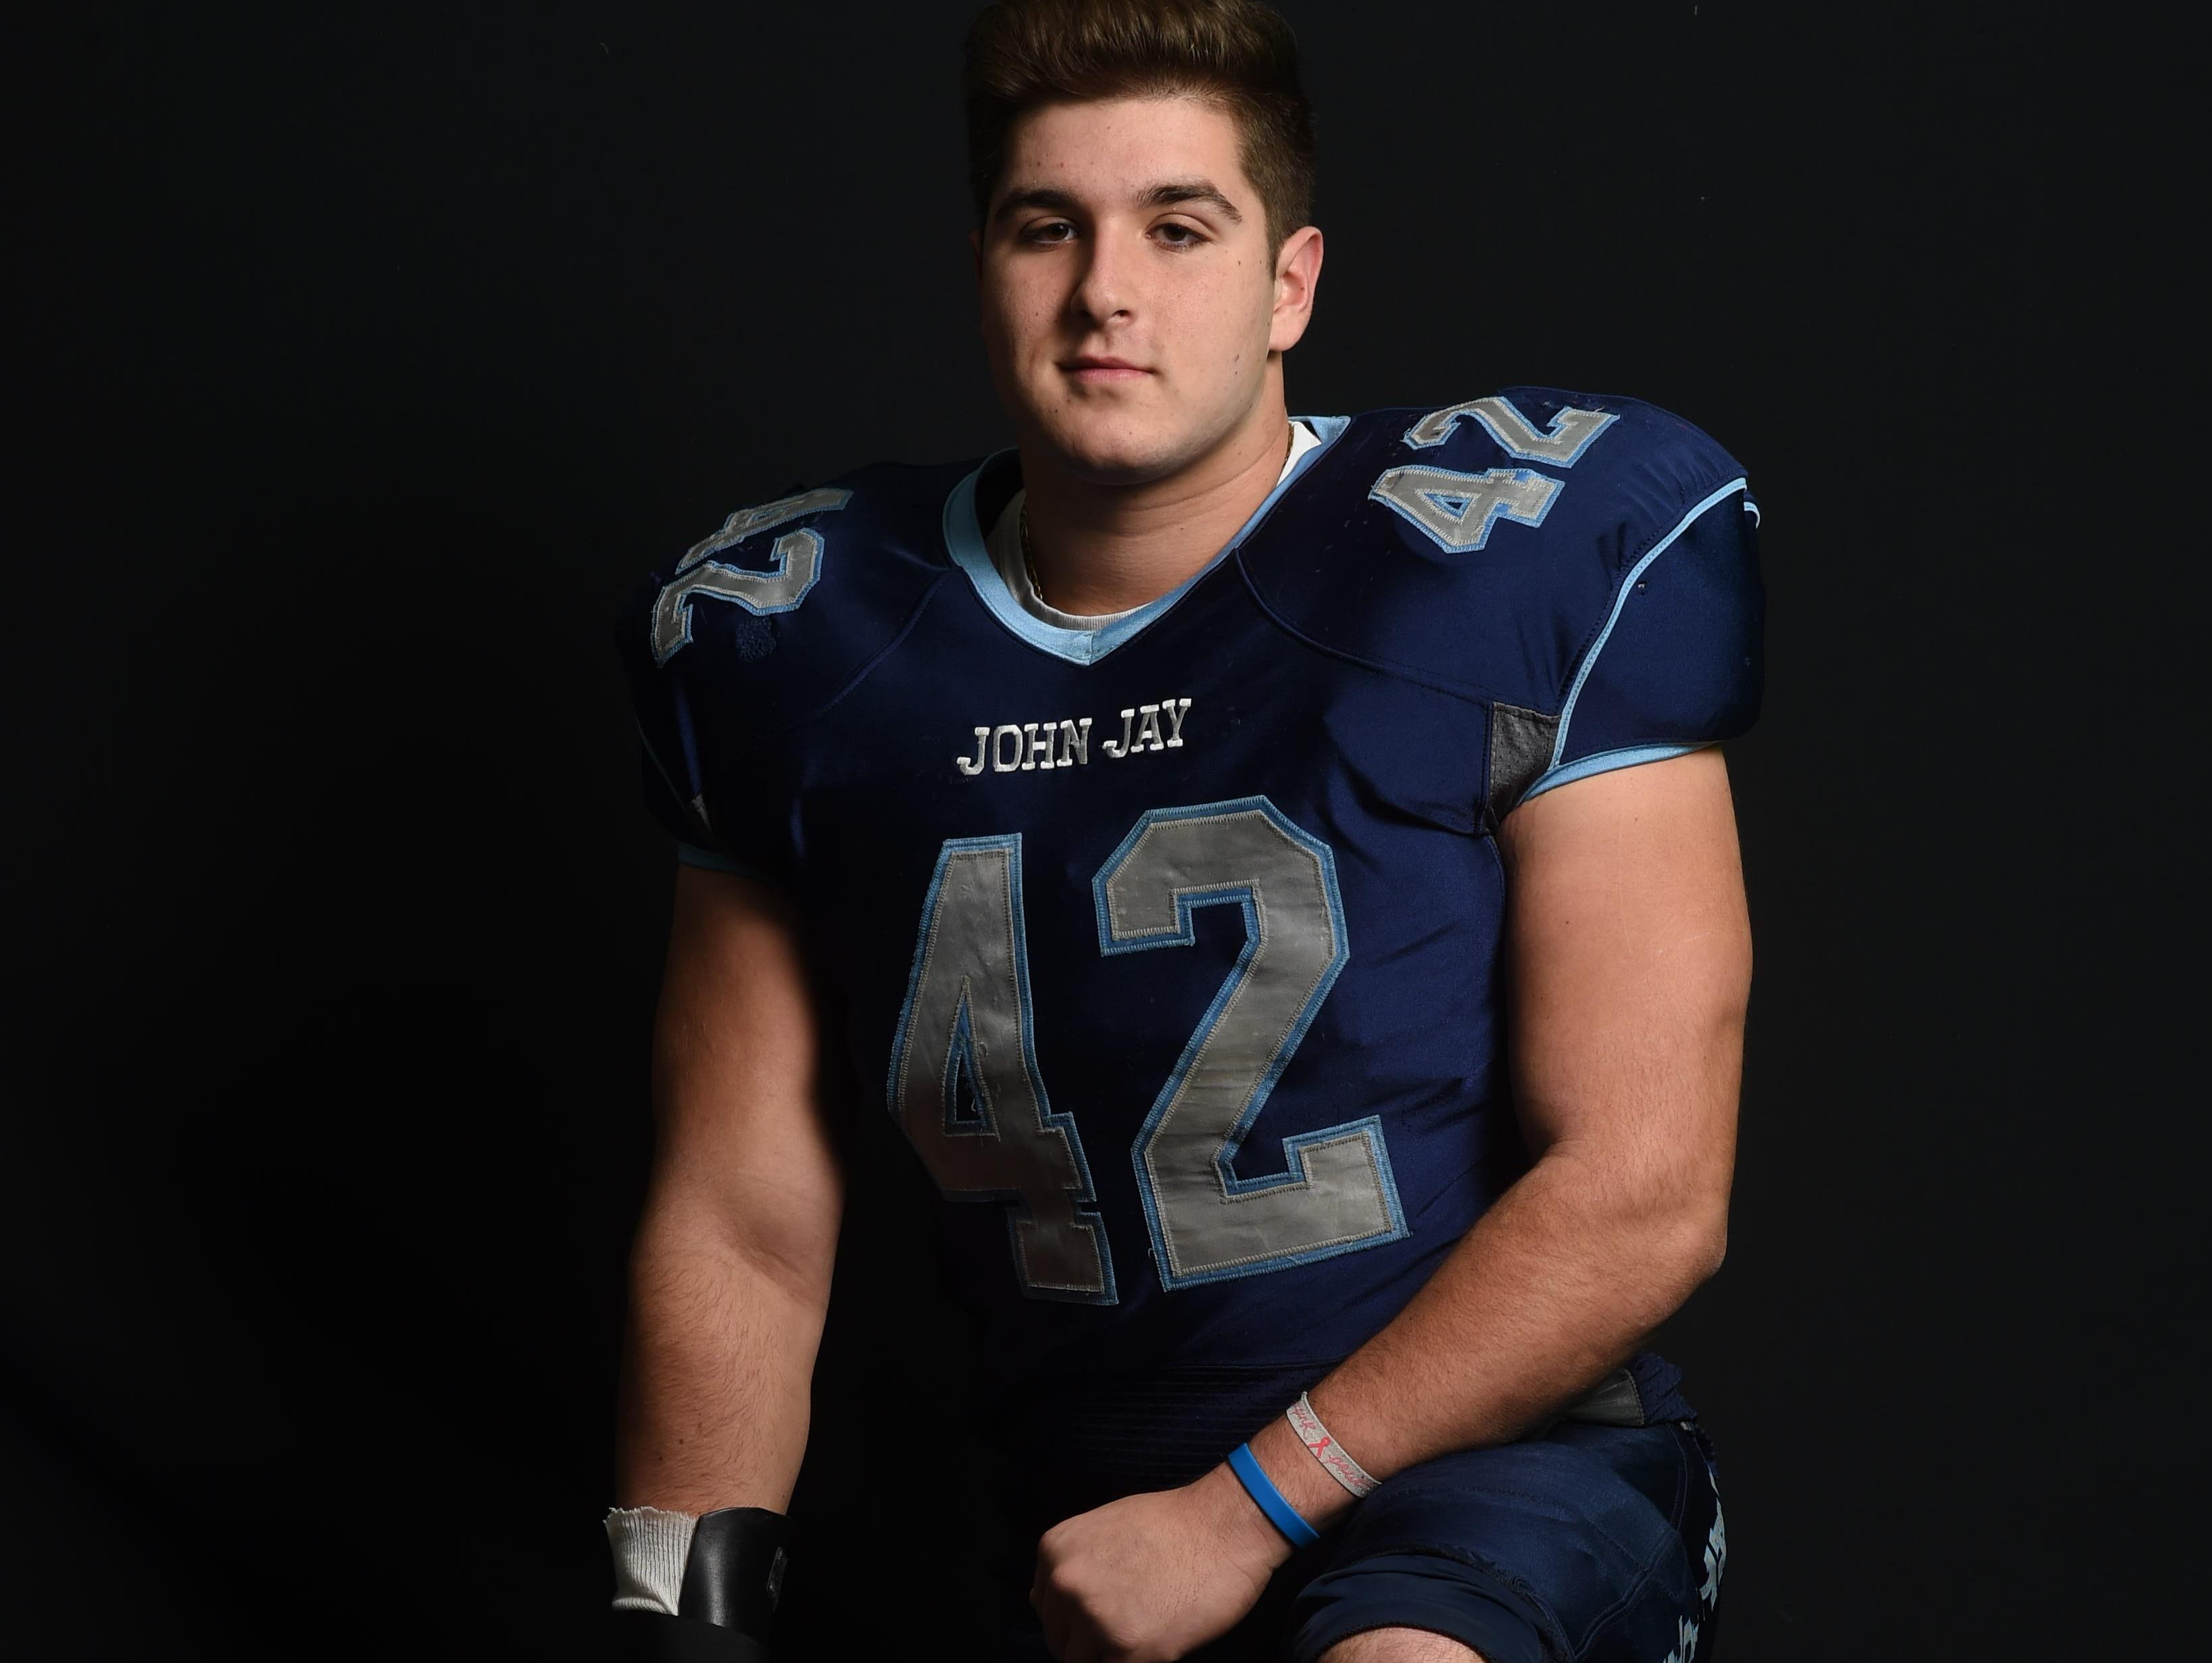 John Jay’s Frank DiFusco is the Defensive Player of the Year.